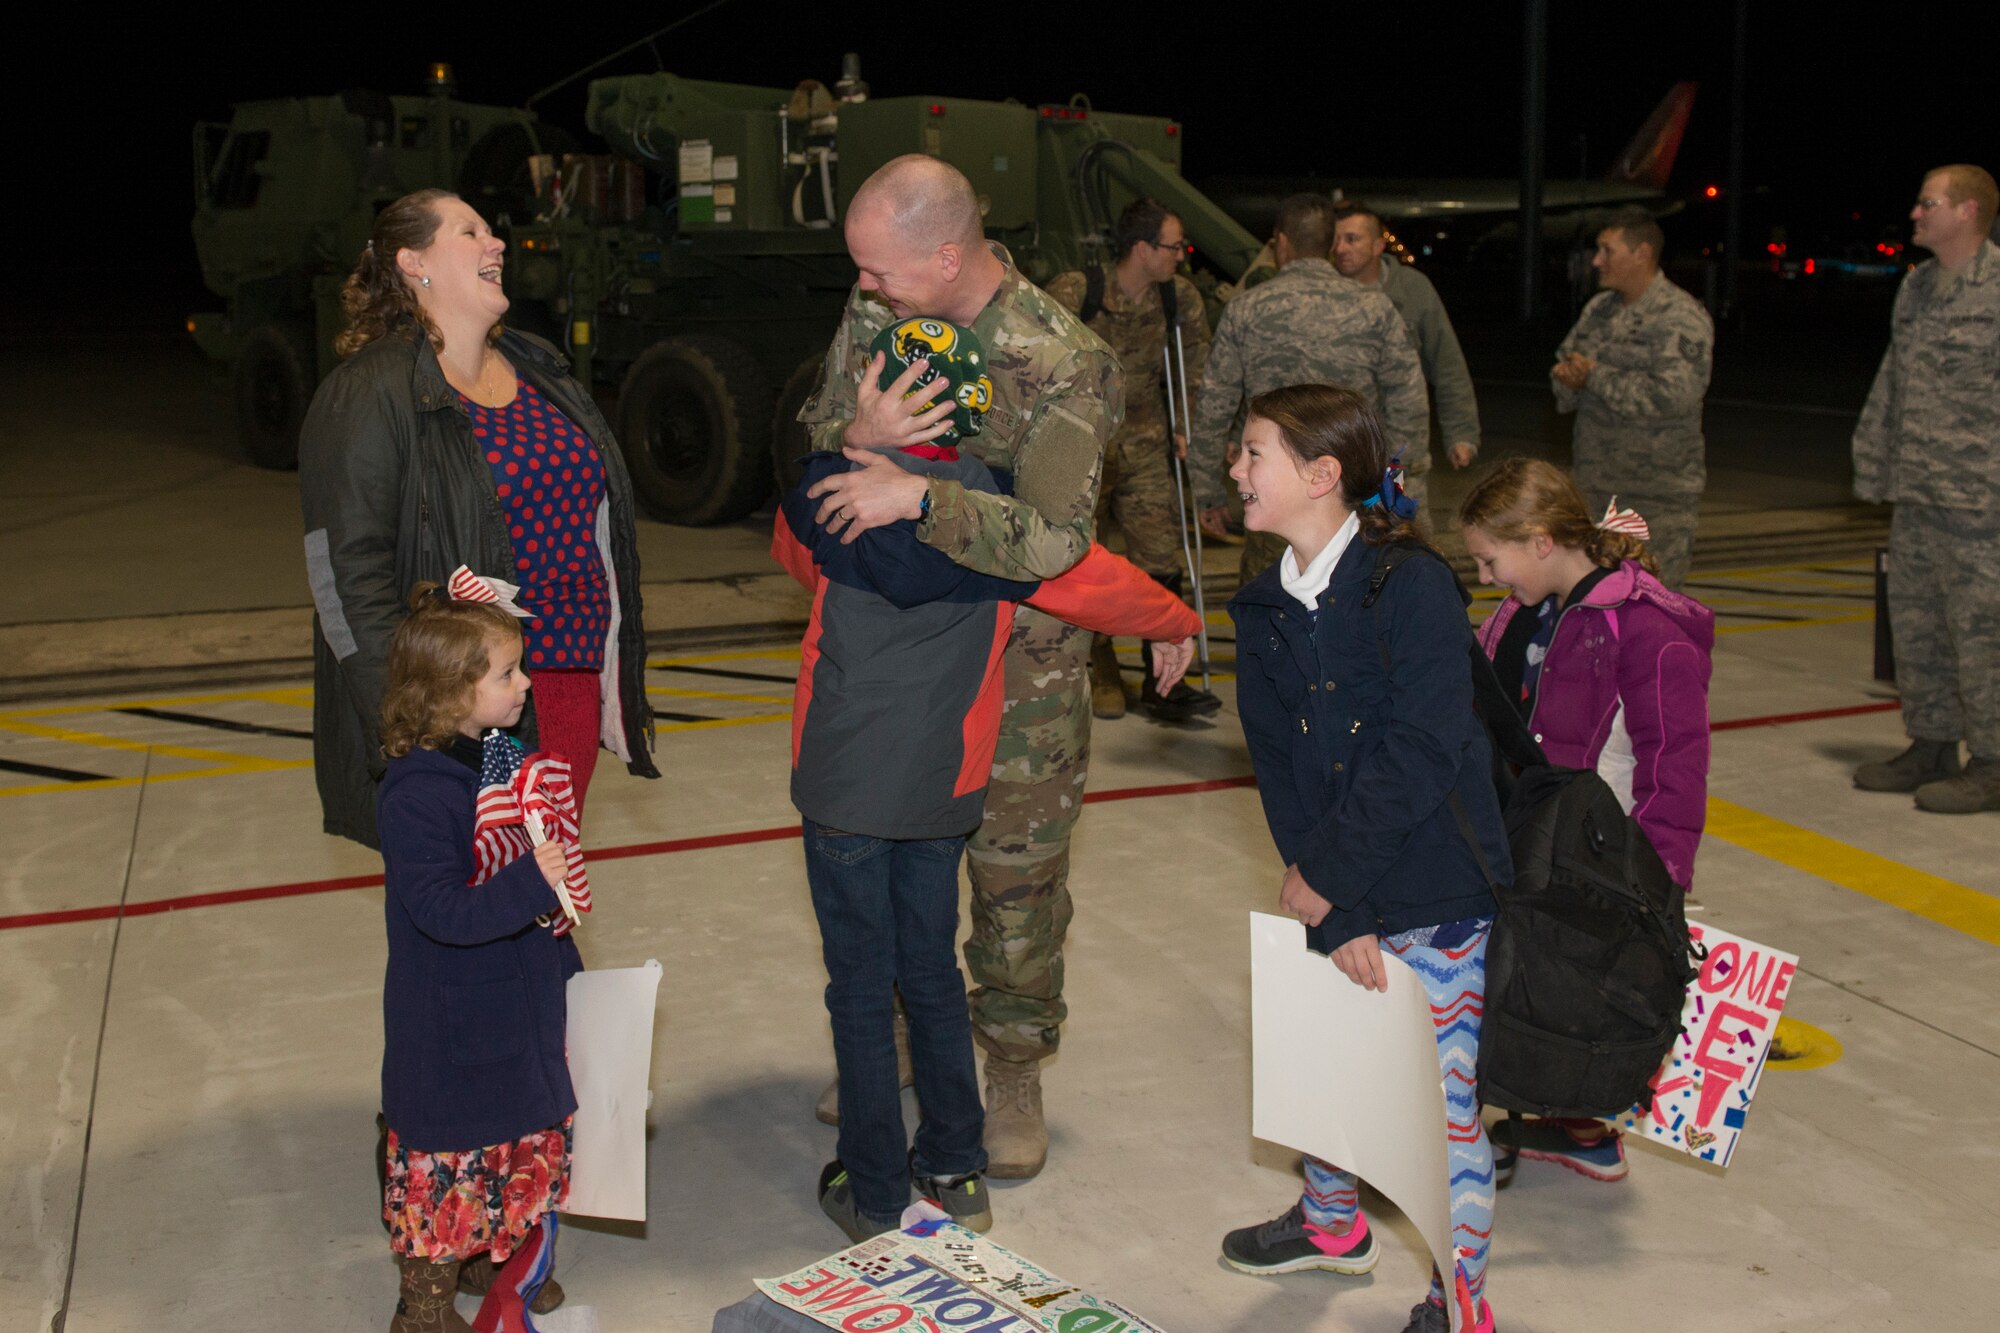 An Airman from the 726th Air Control Squadron returns from deployment and embraces his family, October 27, 2018, at Mountain Home Air Force Base, Idaho. Over 100 Airmen from the 726th ACS deployed with mission of supporting communication between air craft and ground units. (U.S. Air Force photo by Senior Airman Tyrell Hall)